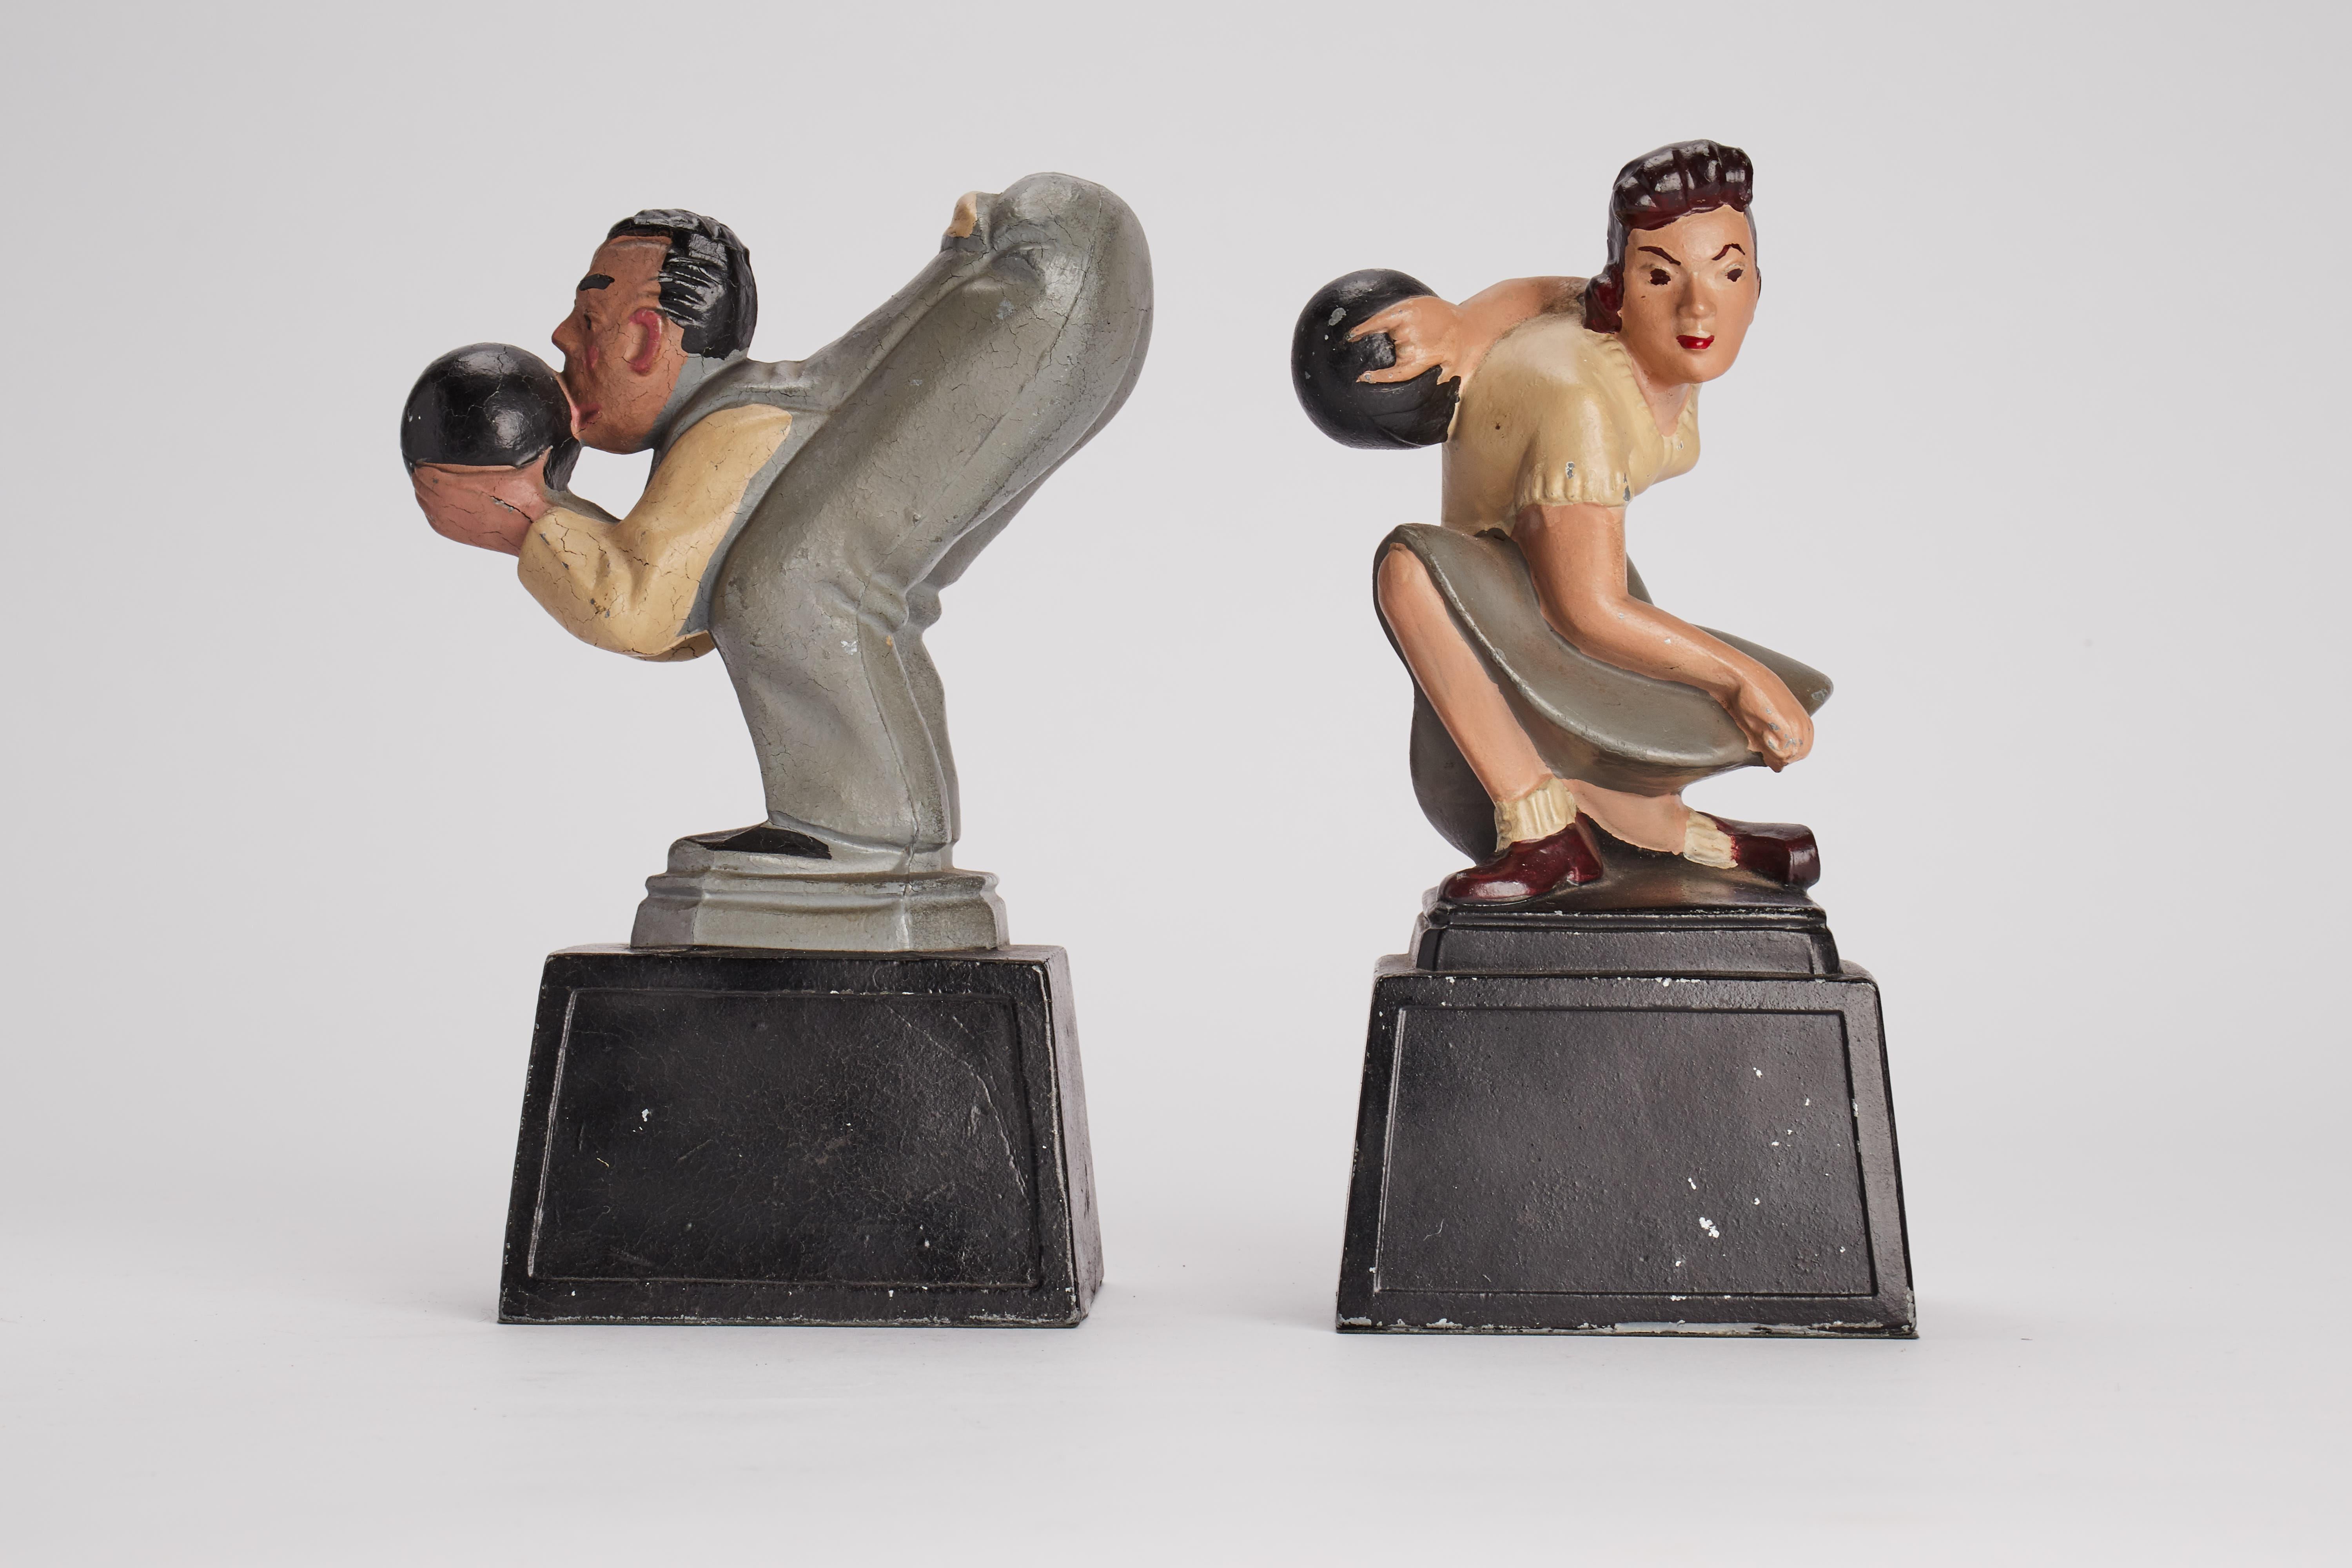 Unusual pair of American Art Deco’ bookends depicting a women and a man playing bowling. Painted white metal sculptures. USA circa 1930.